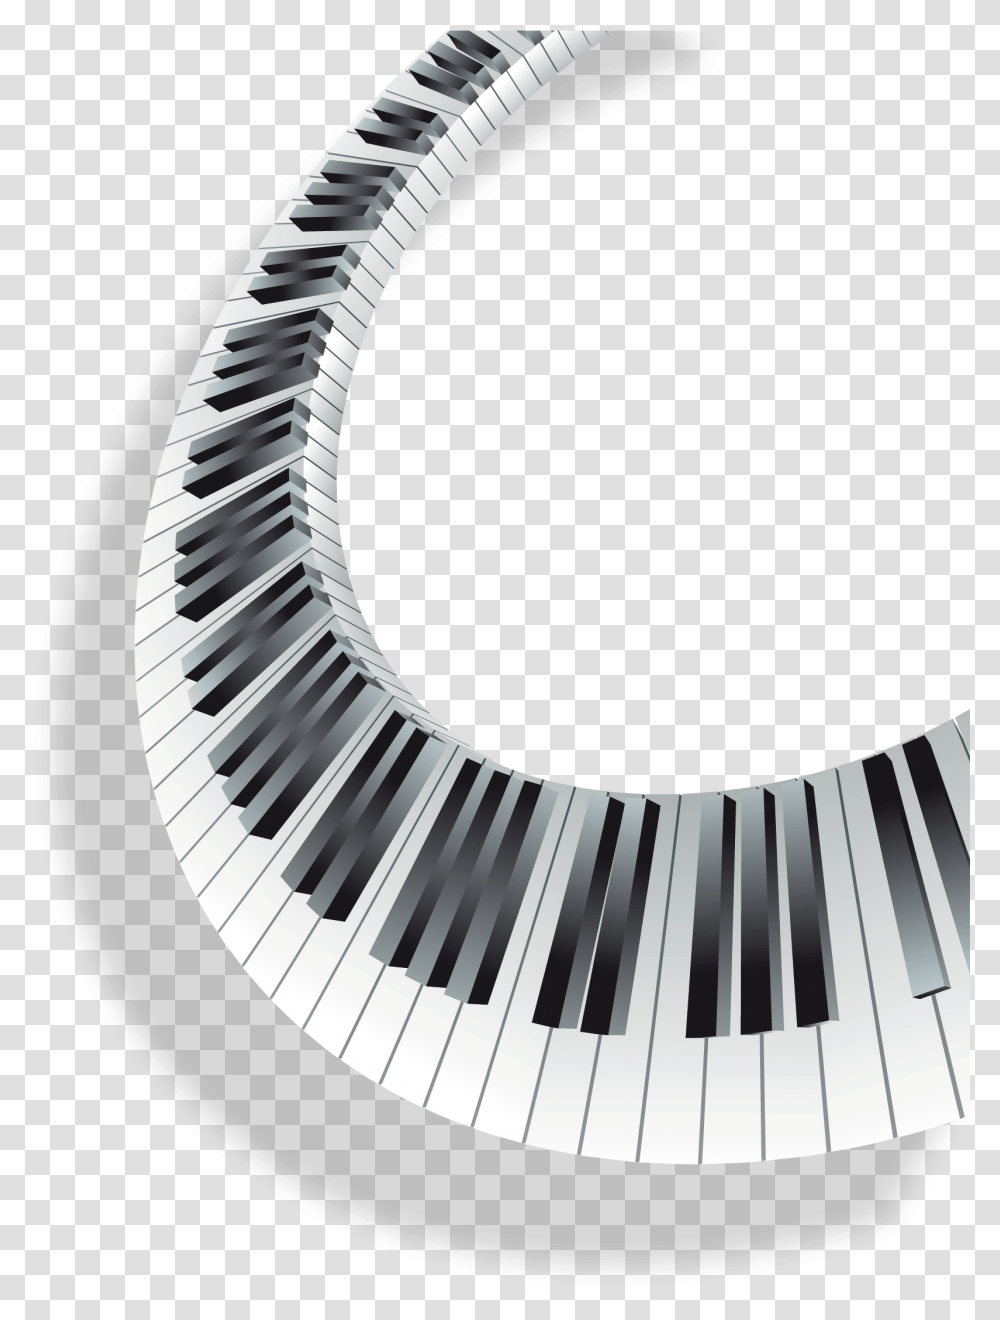 Piano Keys, Staircase, Necklace, Jewelry, Accessories Transparent Png